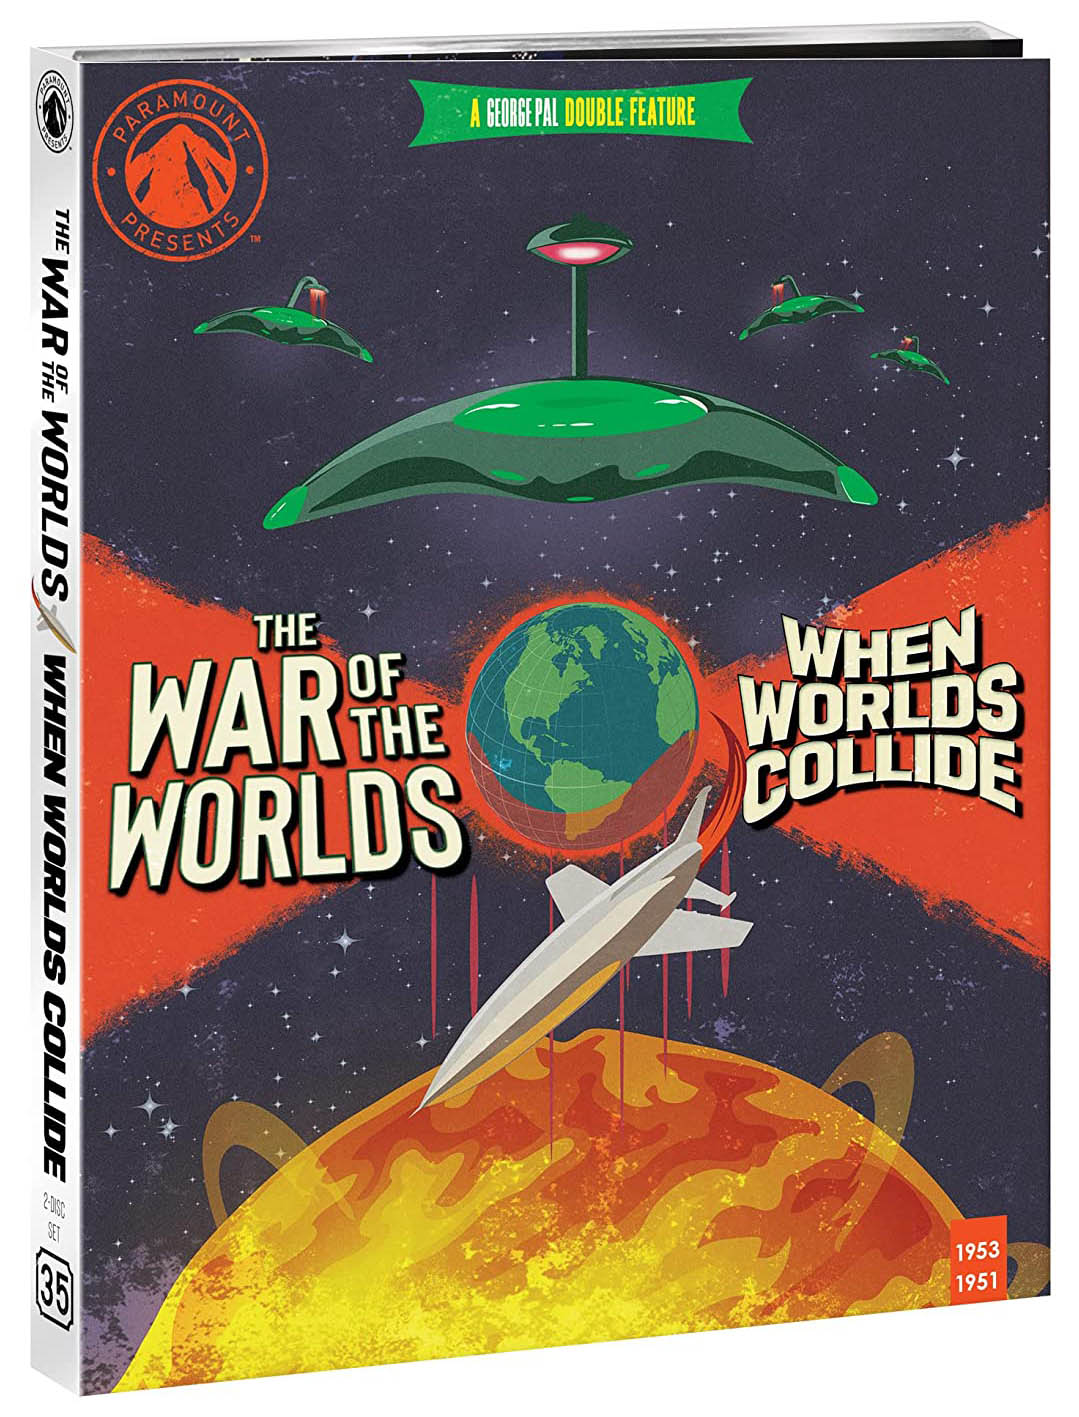 War of the Worlds (1953) 4k Blu-ray Paramount Presents